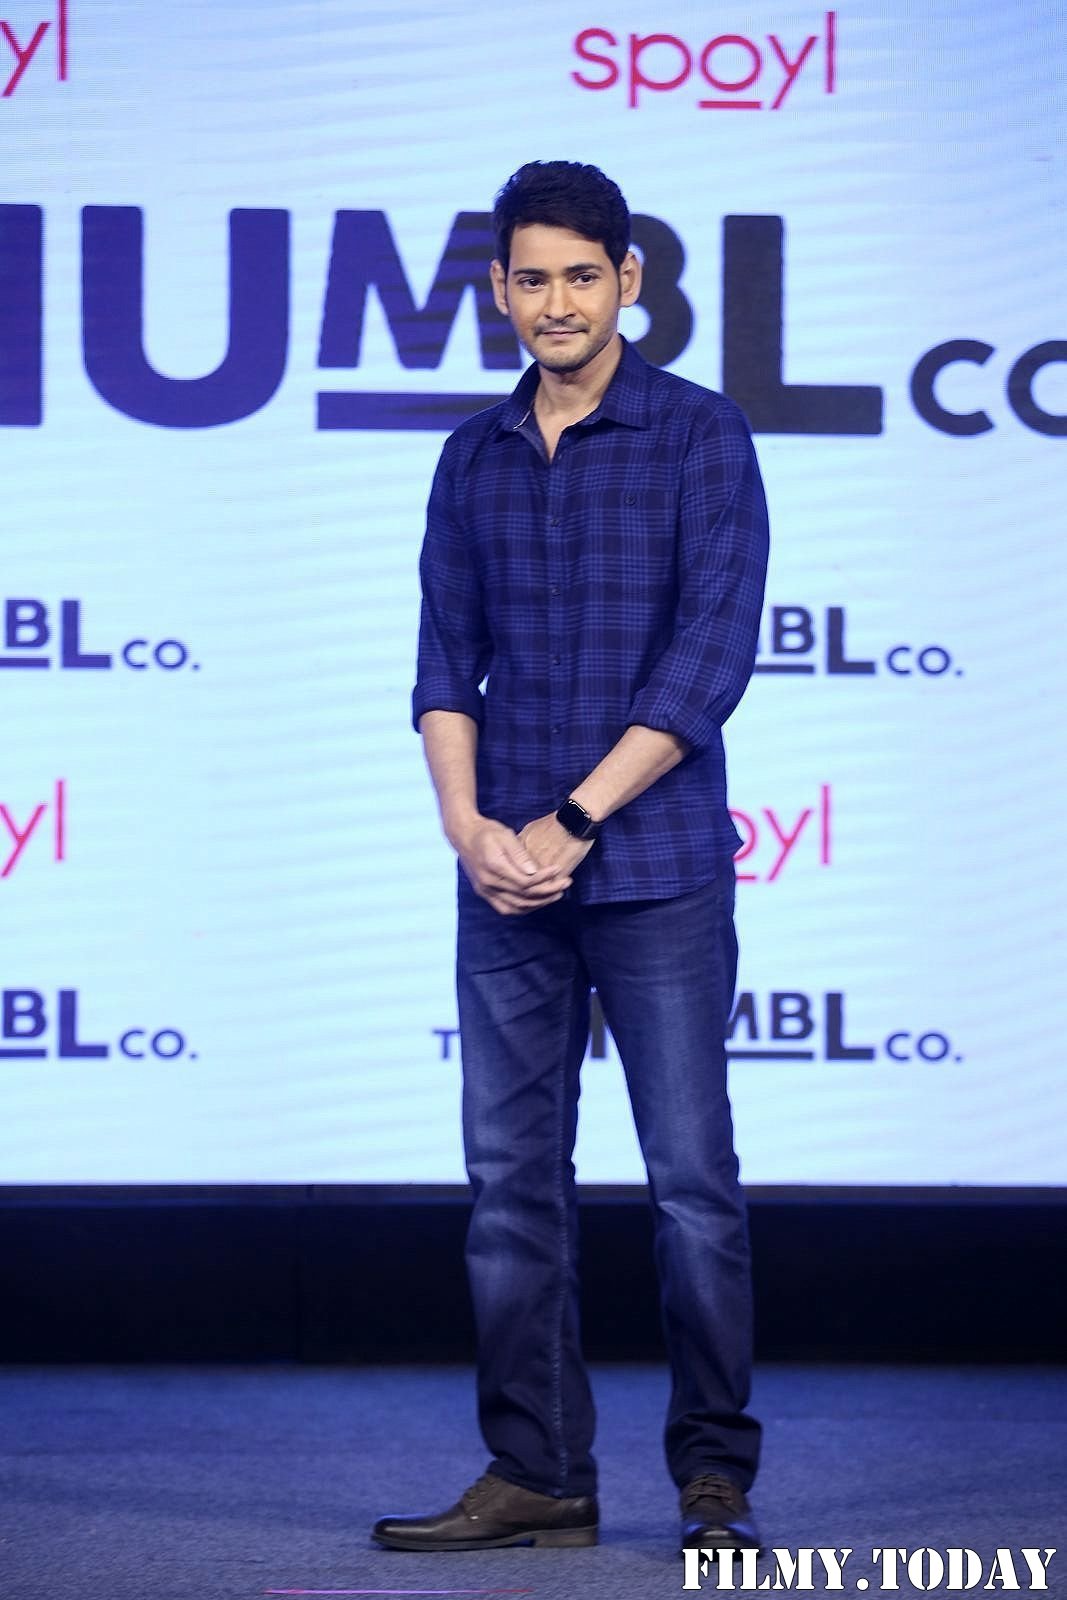 Mahesh Babu - The Humbl Co Clothing Brand Launch Photos | Picture 1673370